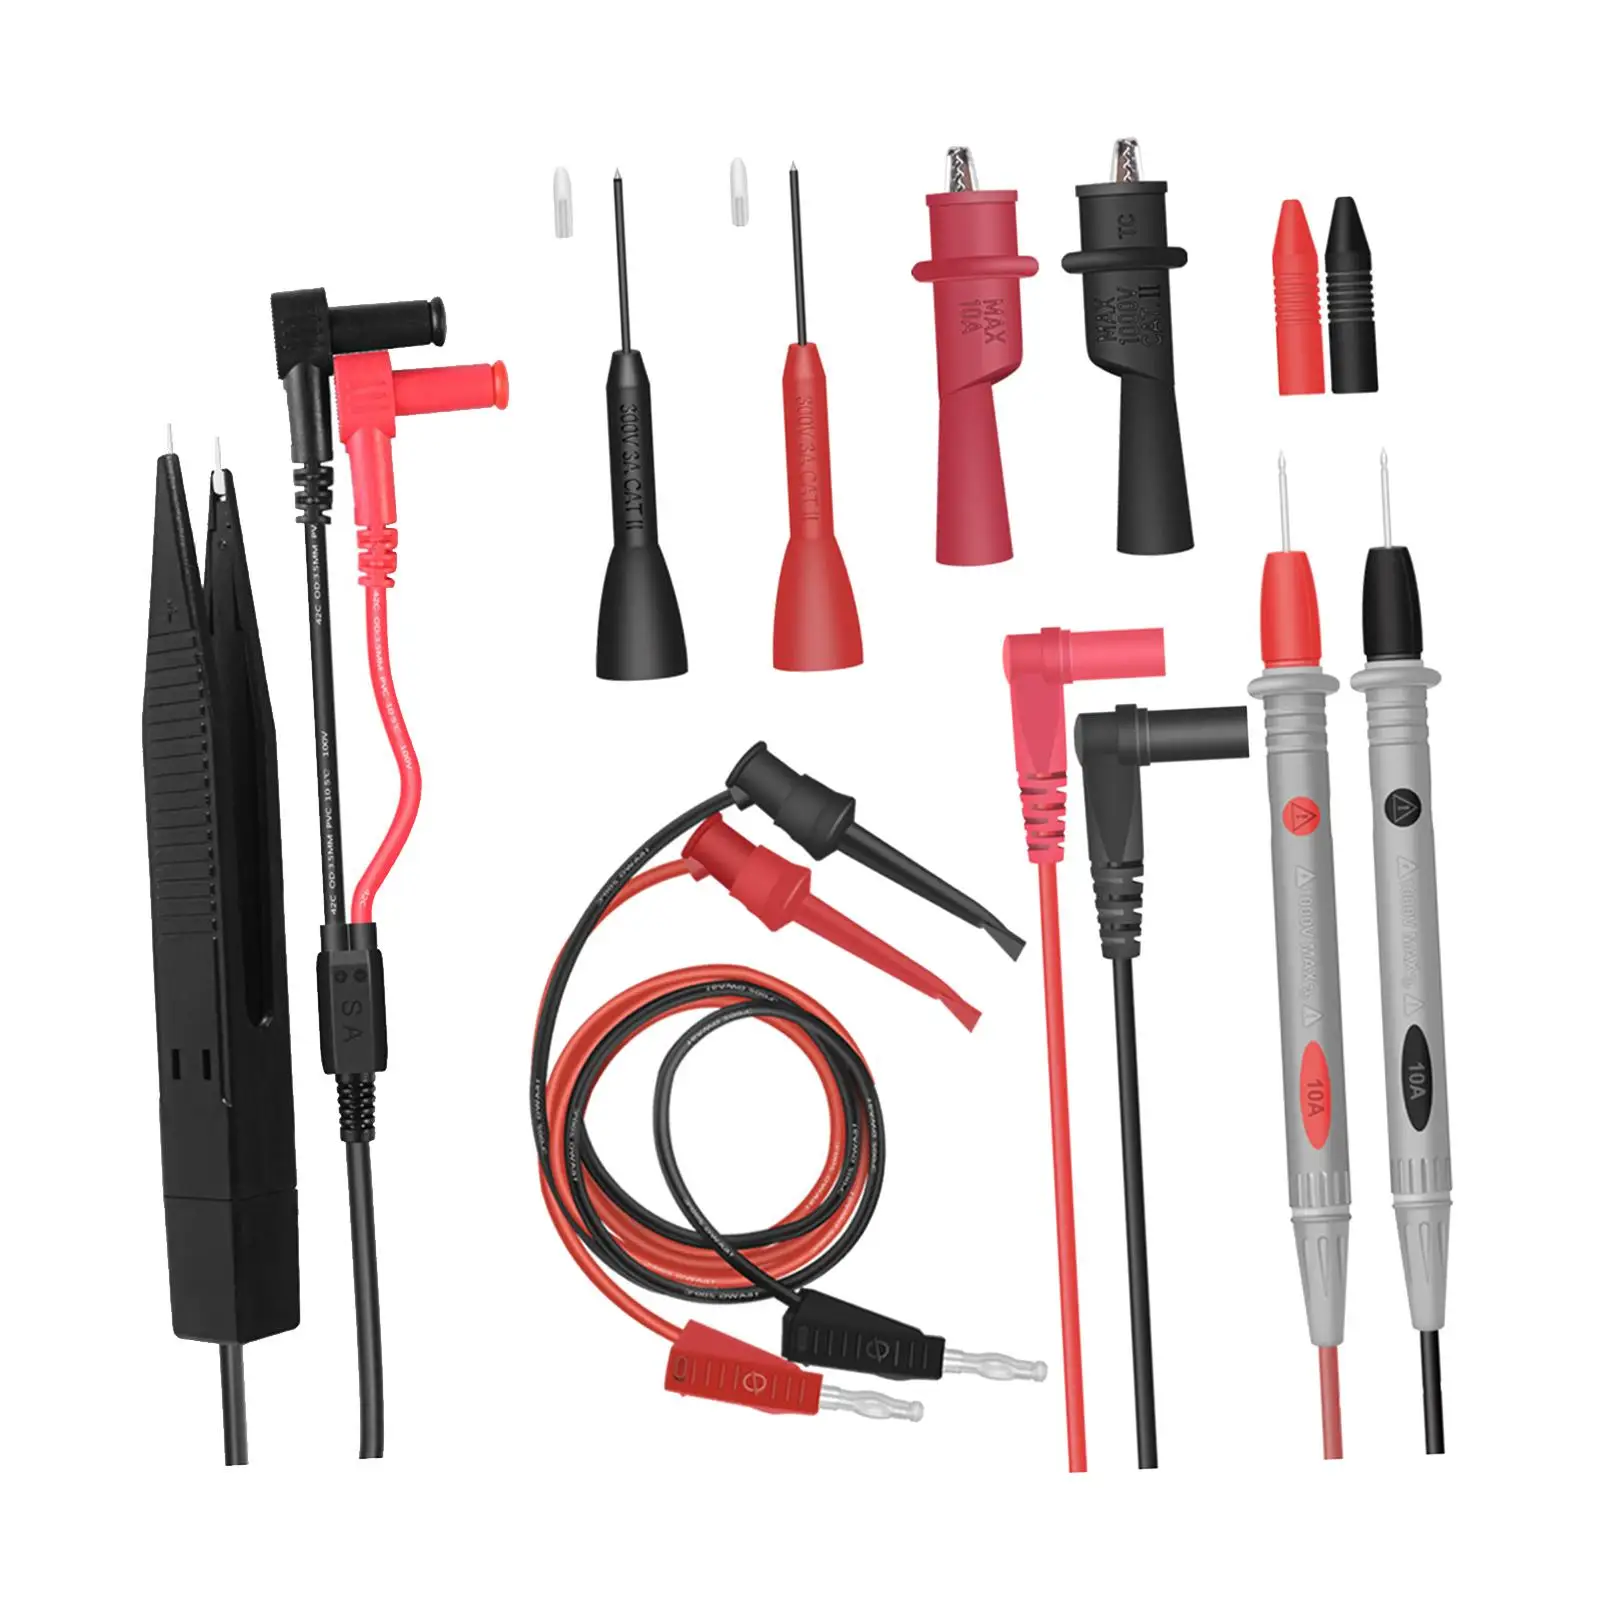 Multimeter Leads Kit Back Probe Pins Test Leads Probes for Digital Electrical Multimeter Testing Electrical Testing Soft Durable